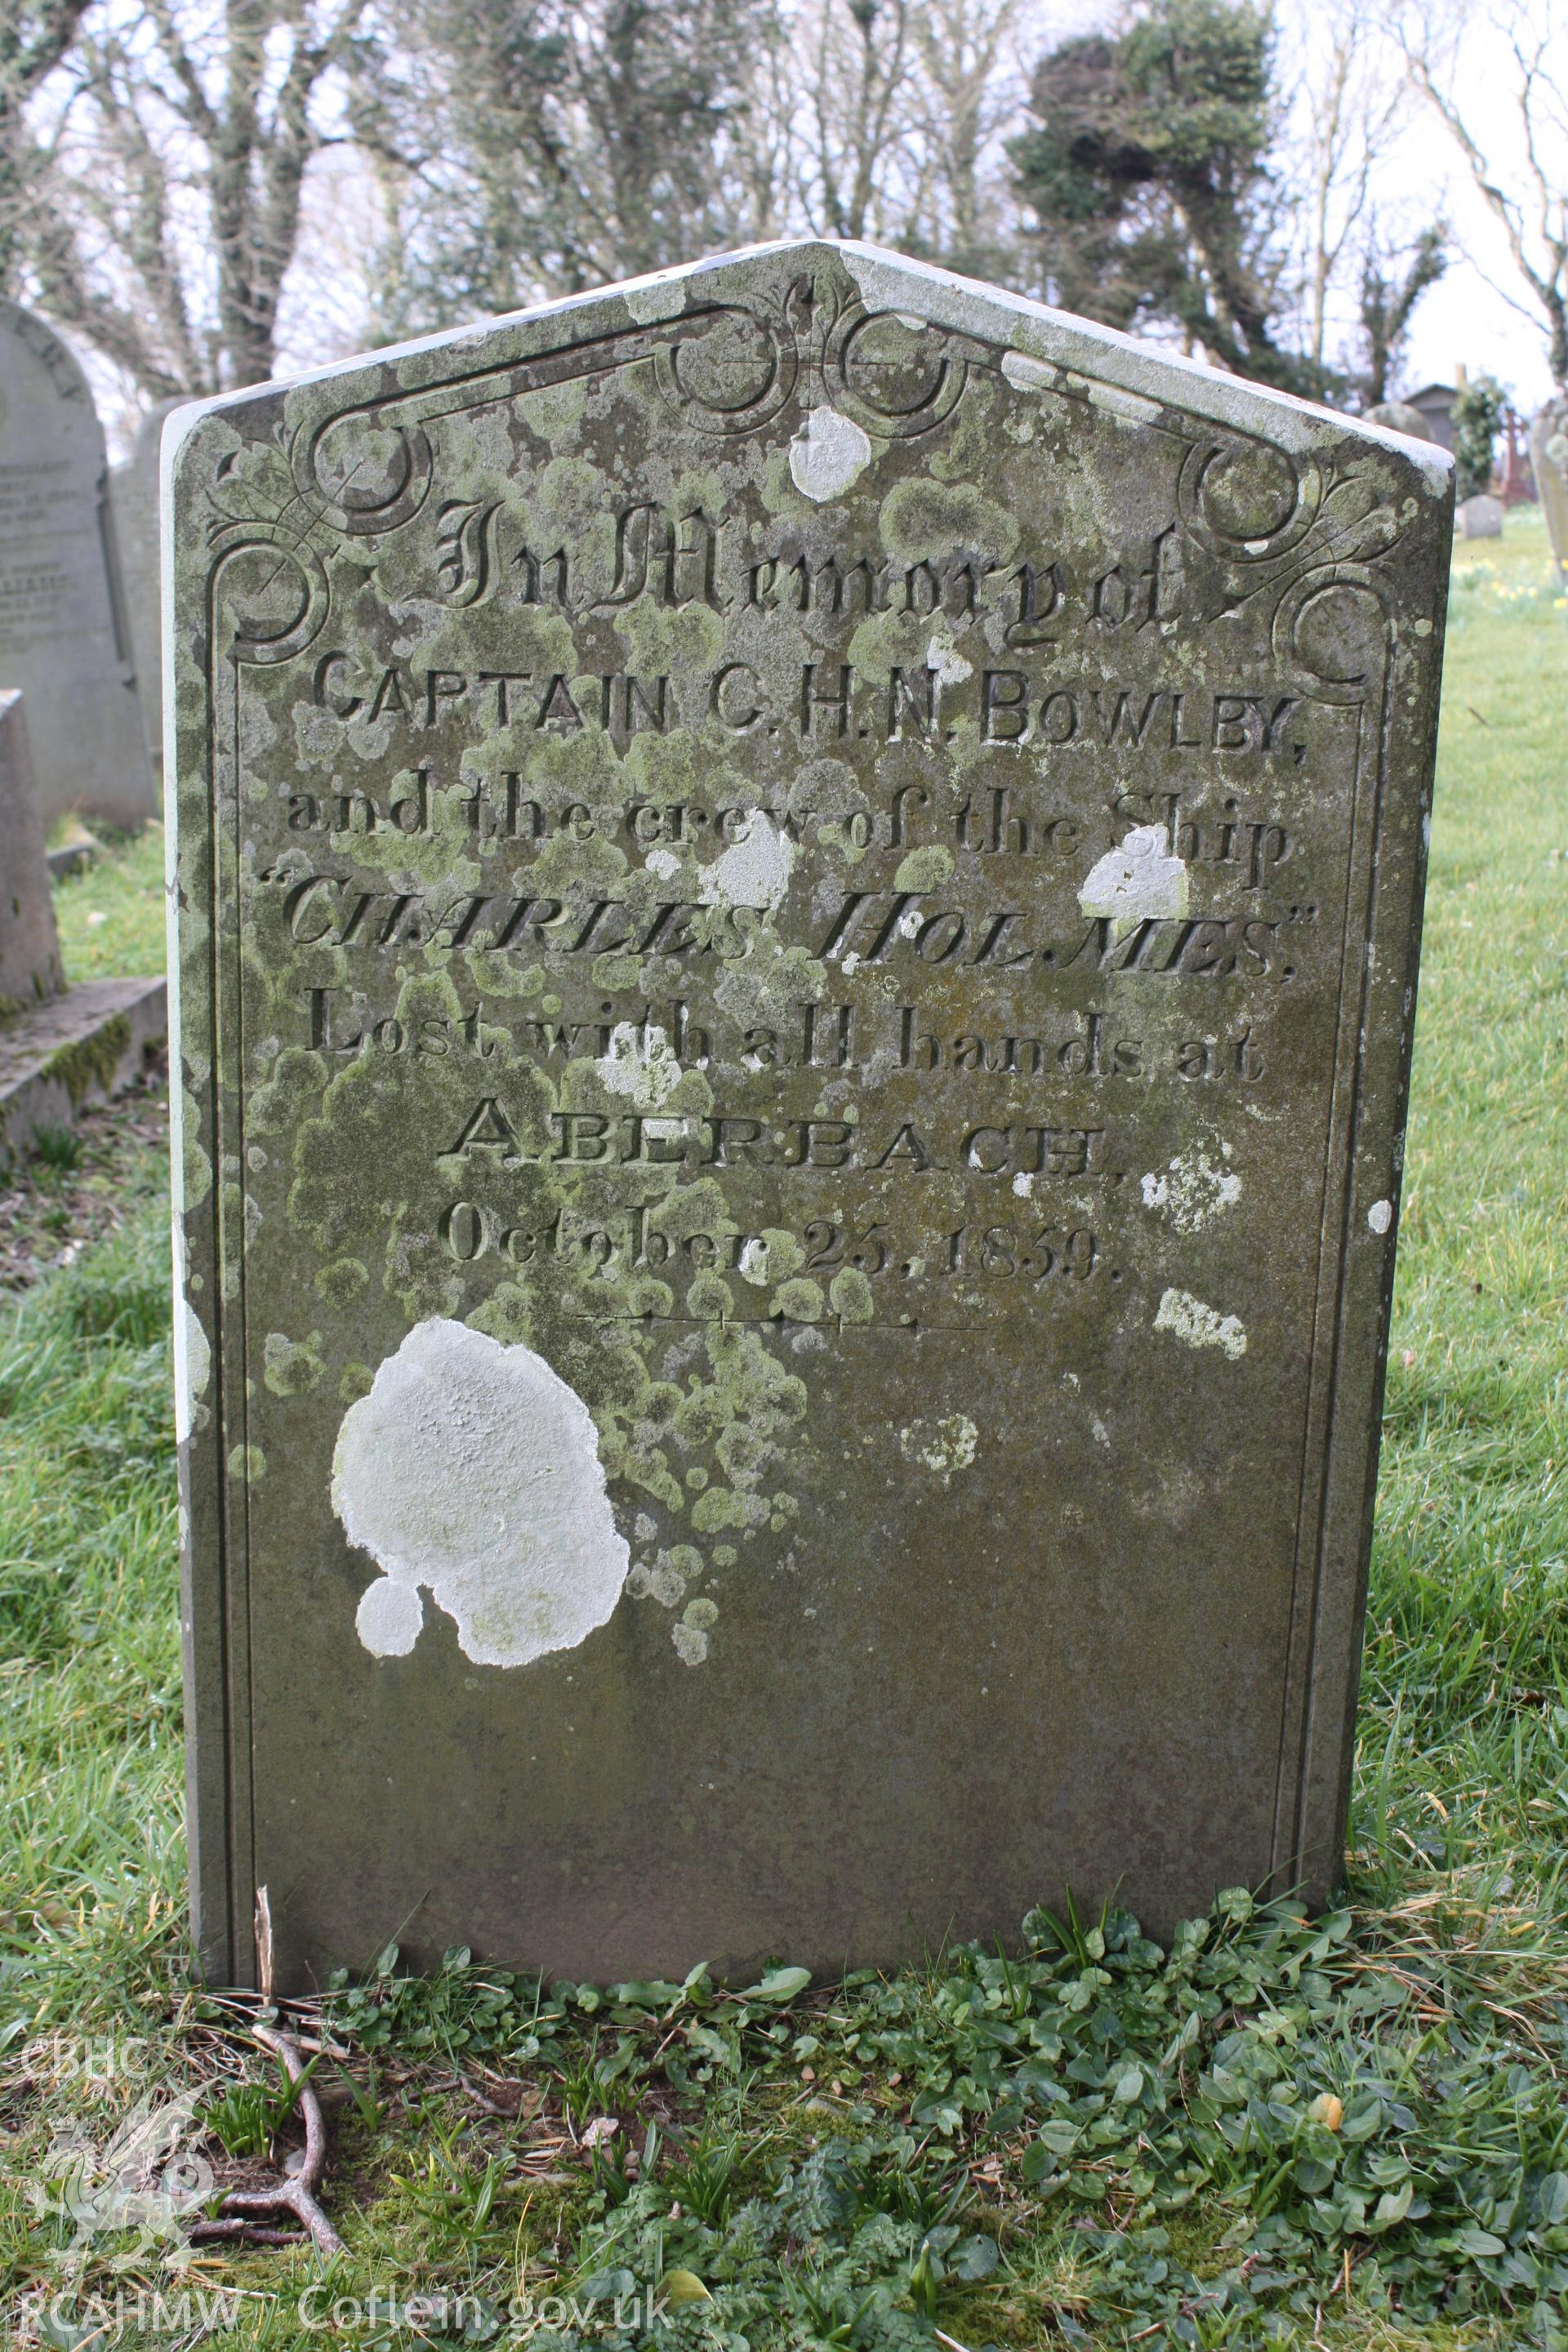 Gravestone commemorating the crew of the CHARLES HOLMES lost in Royal Charter Gale in October 1859